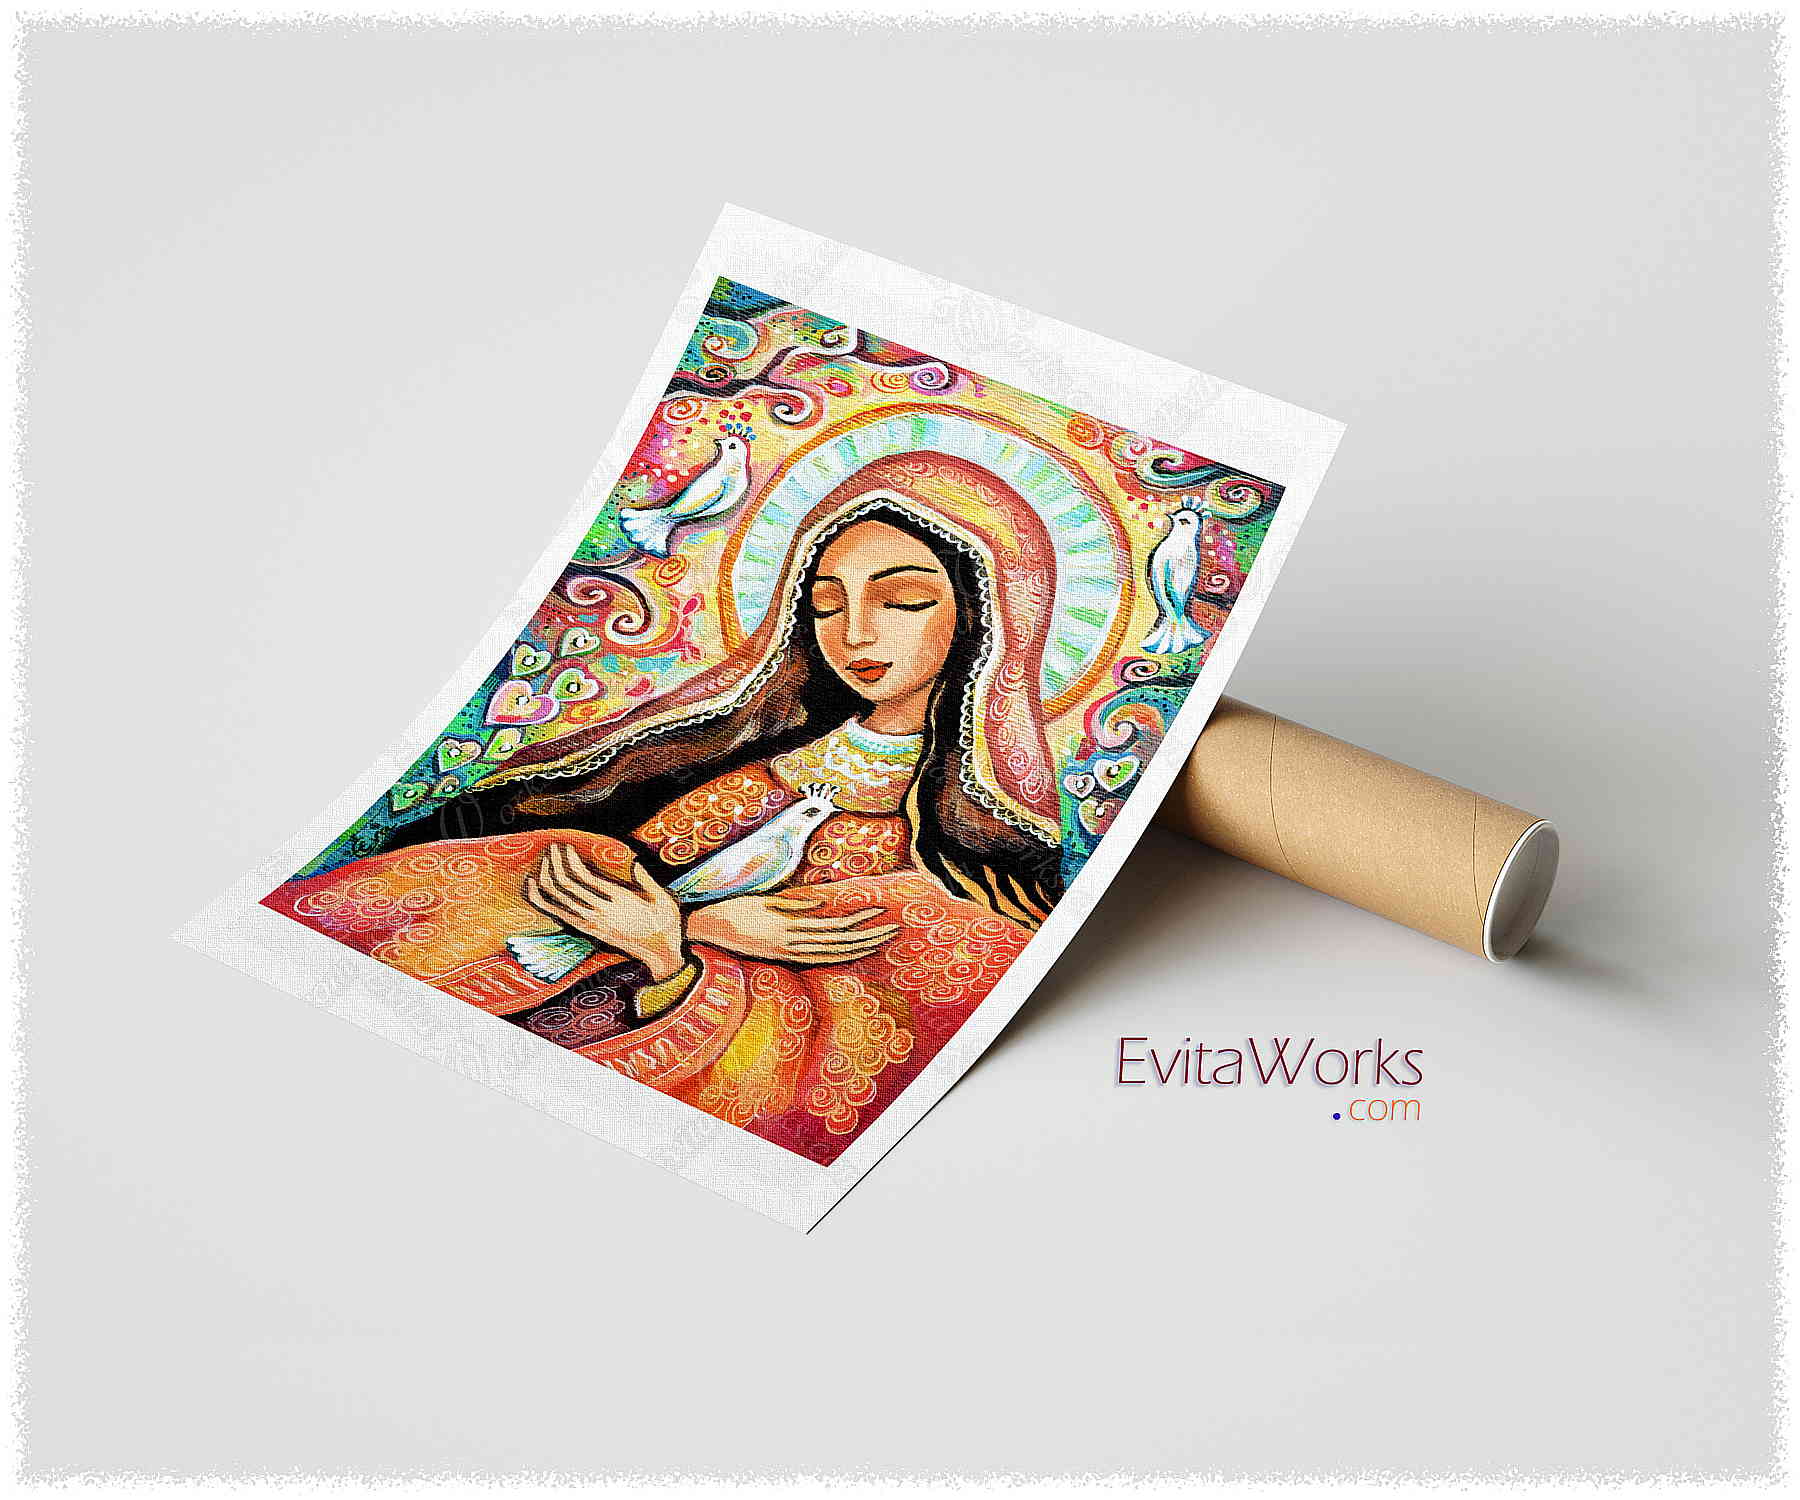 Hit to learn about "The Prayer of Mary, holy woman" on prints